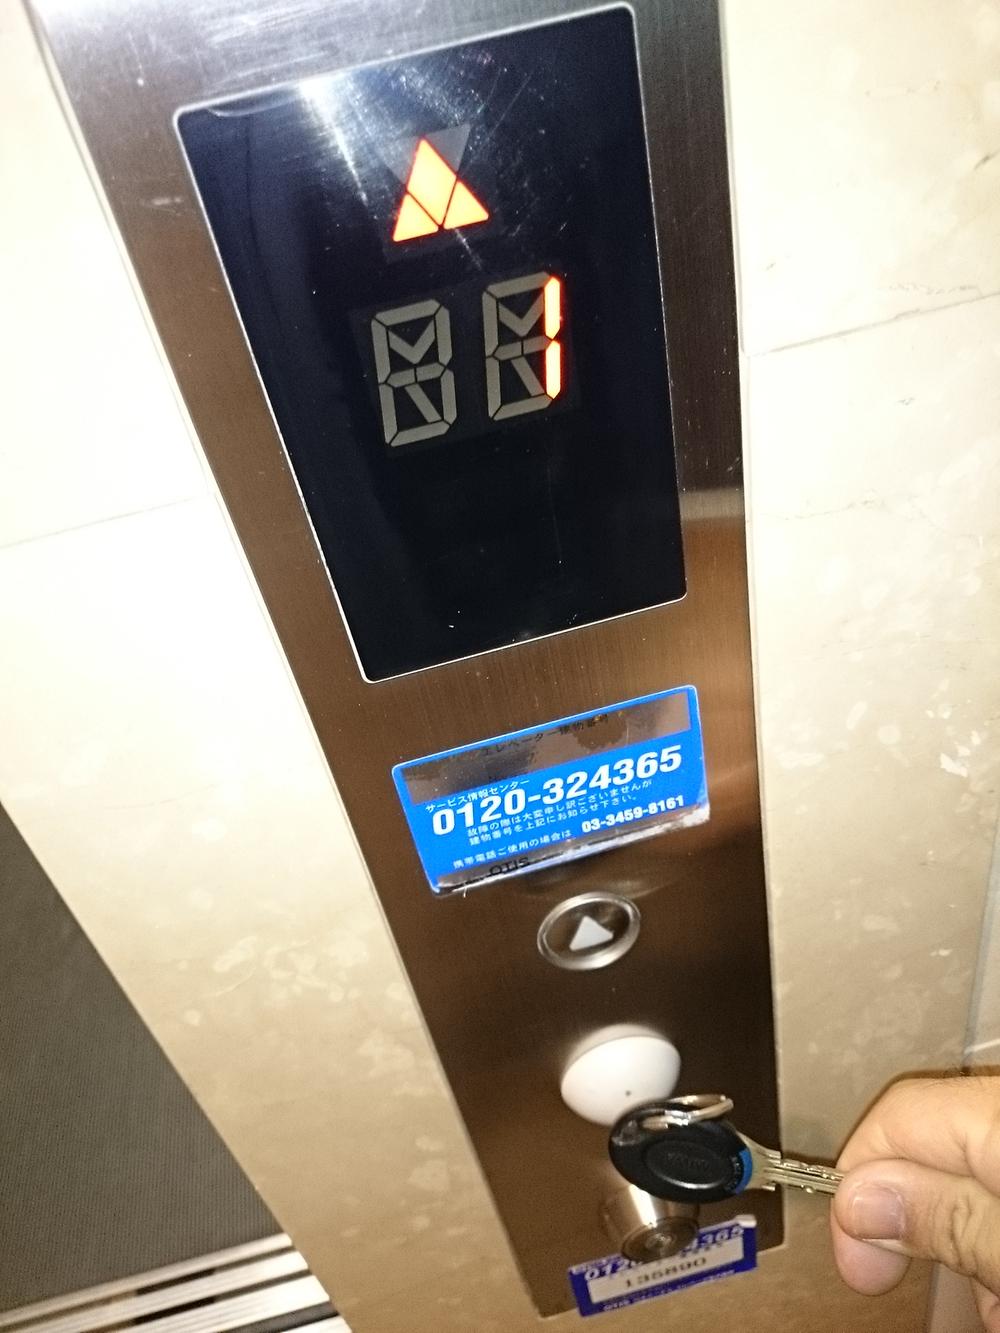 Security equipment. Elevator also IC authentication. It is a safe security system.